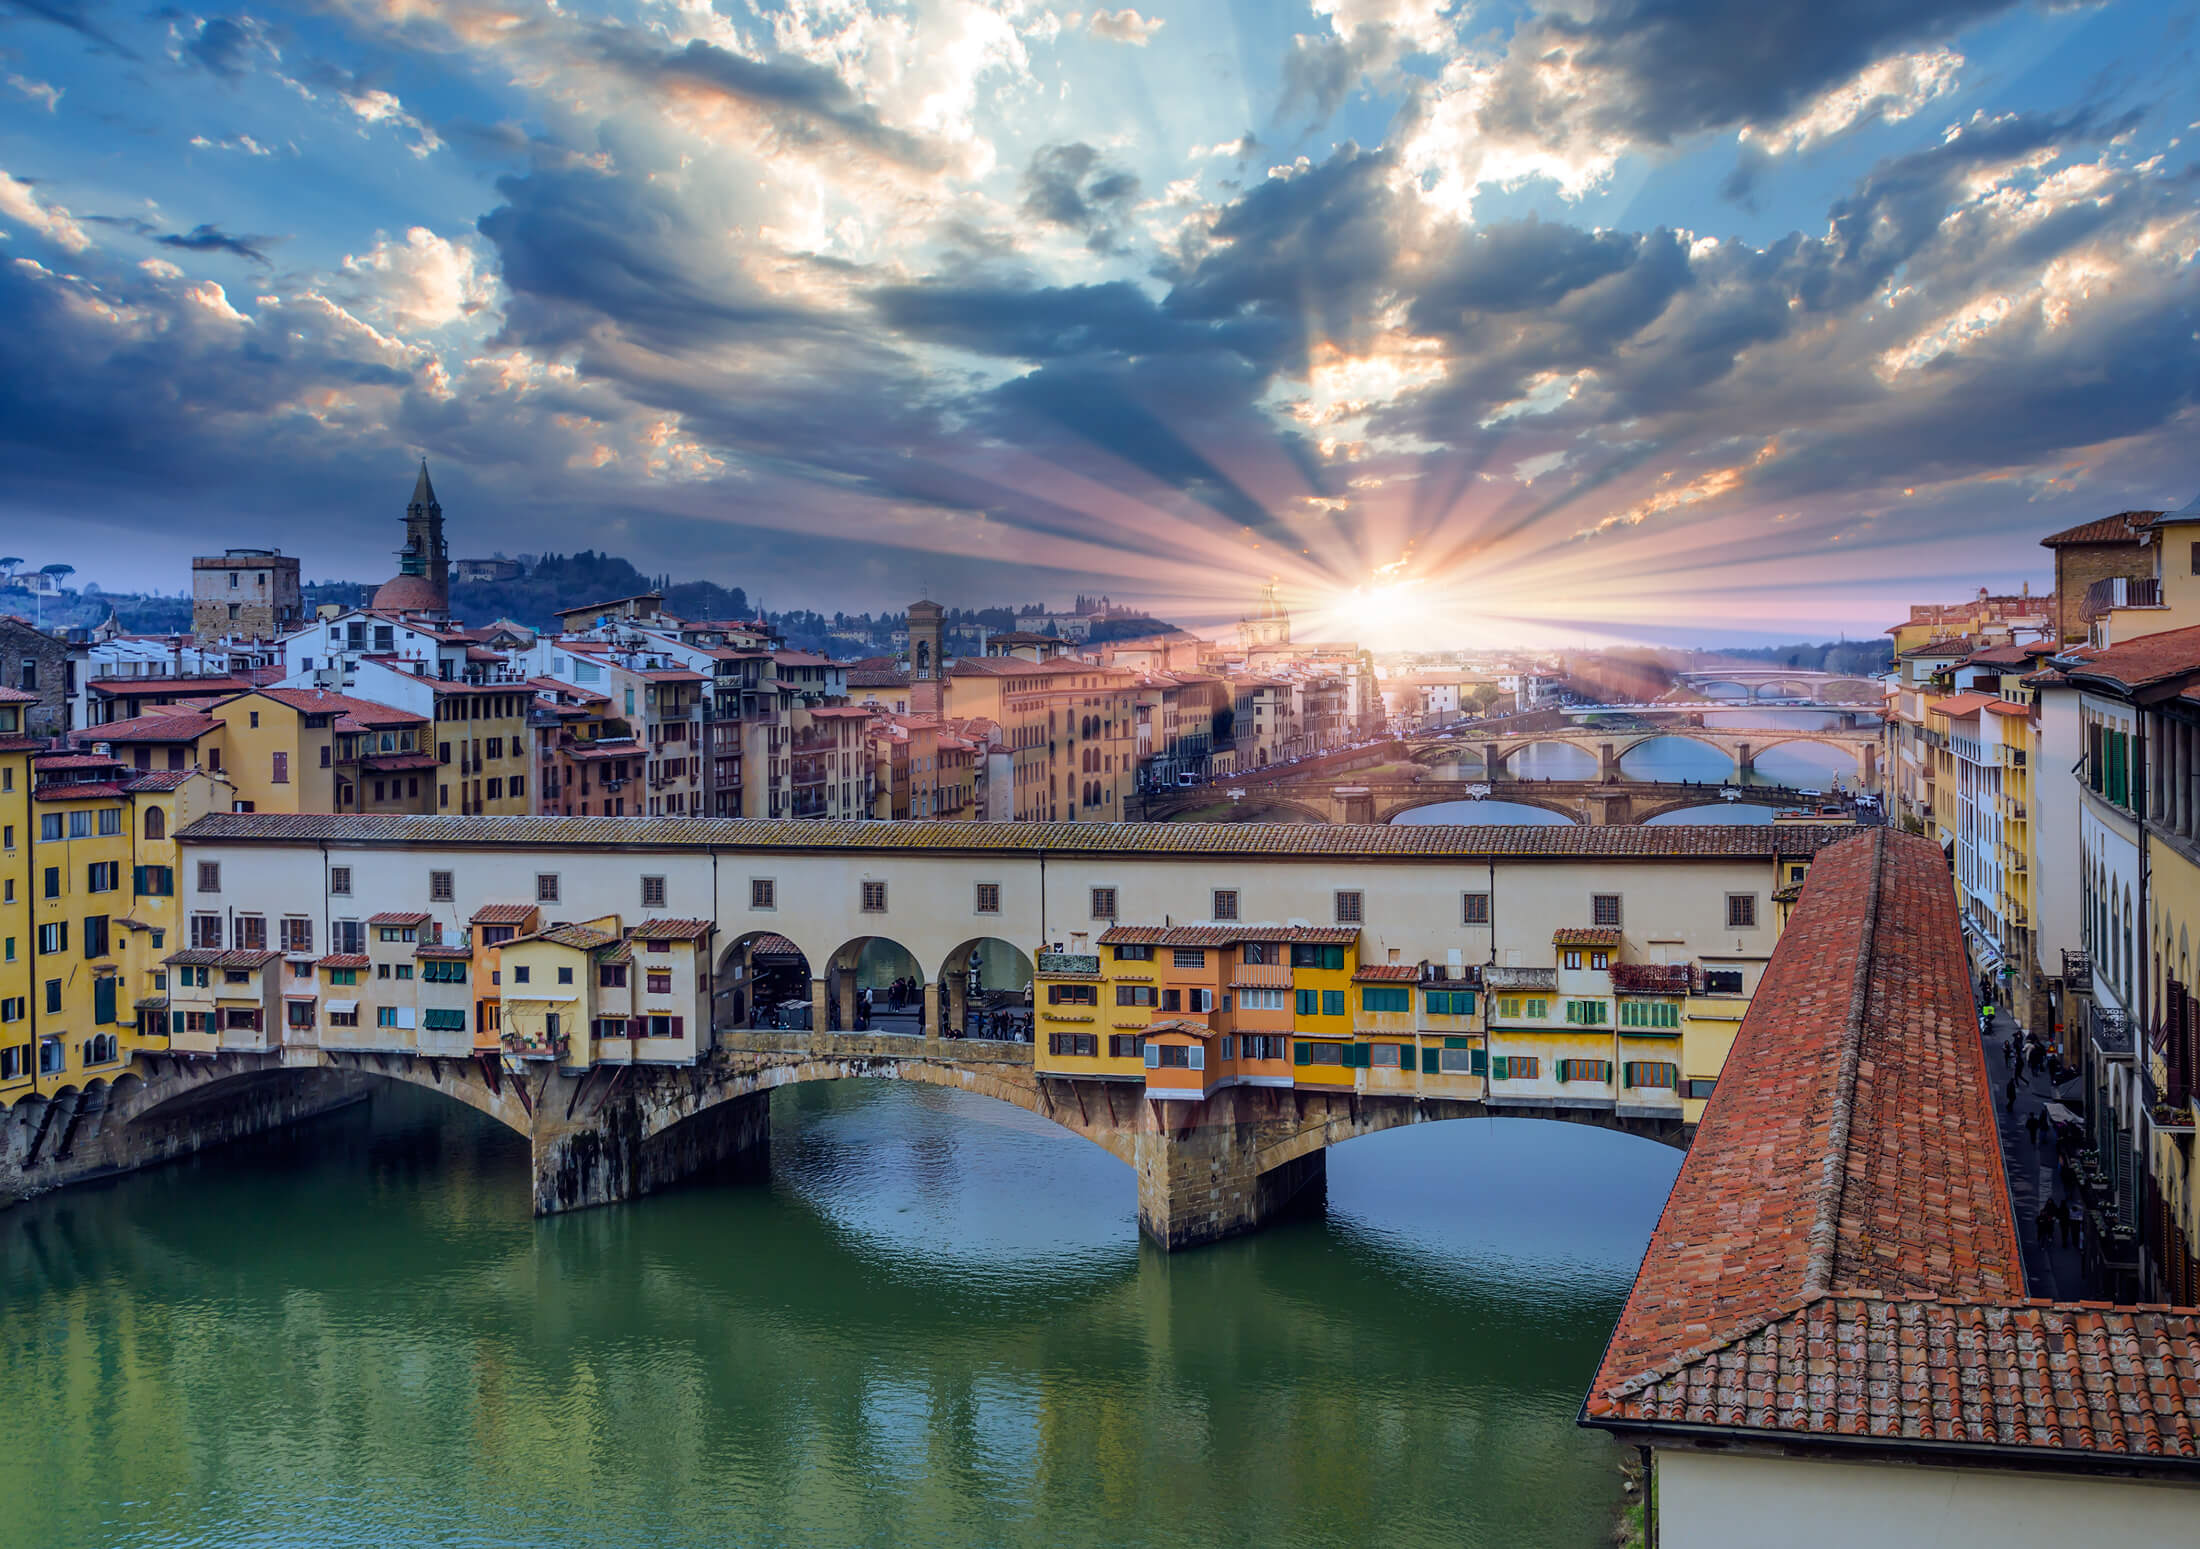 The sun above the Ponte Vecchio in Florence, Italy